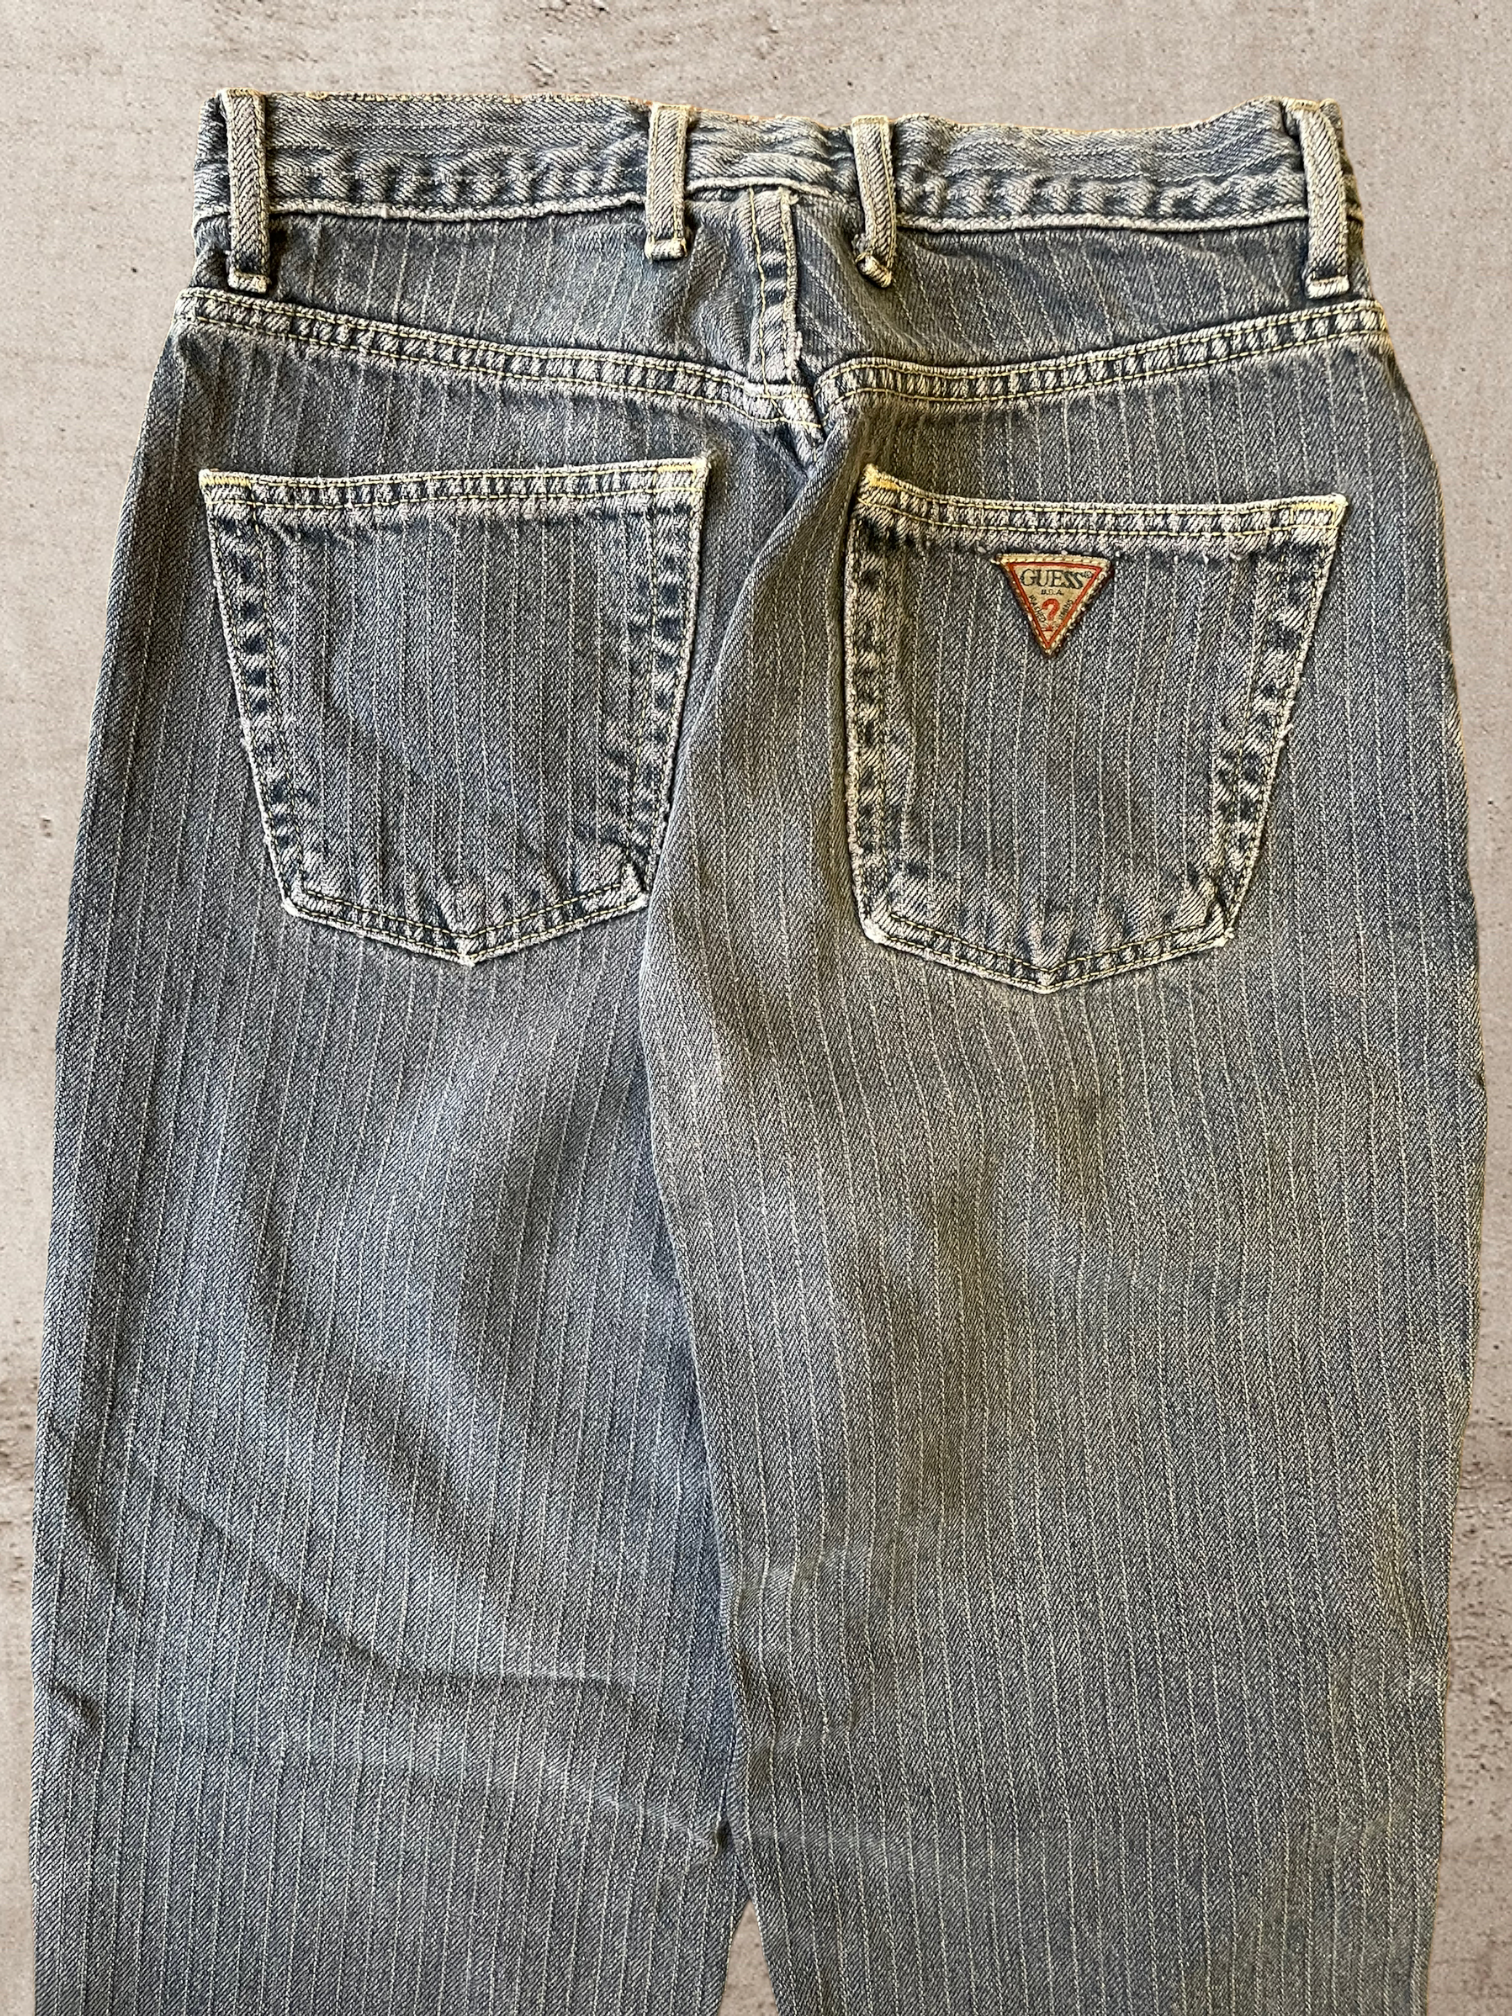 90s Guess Stripped Jeans - 27x26